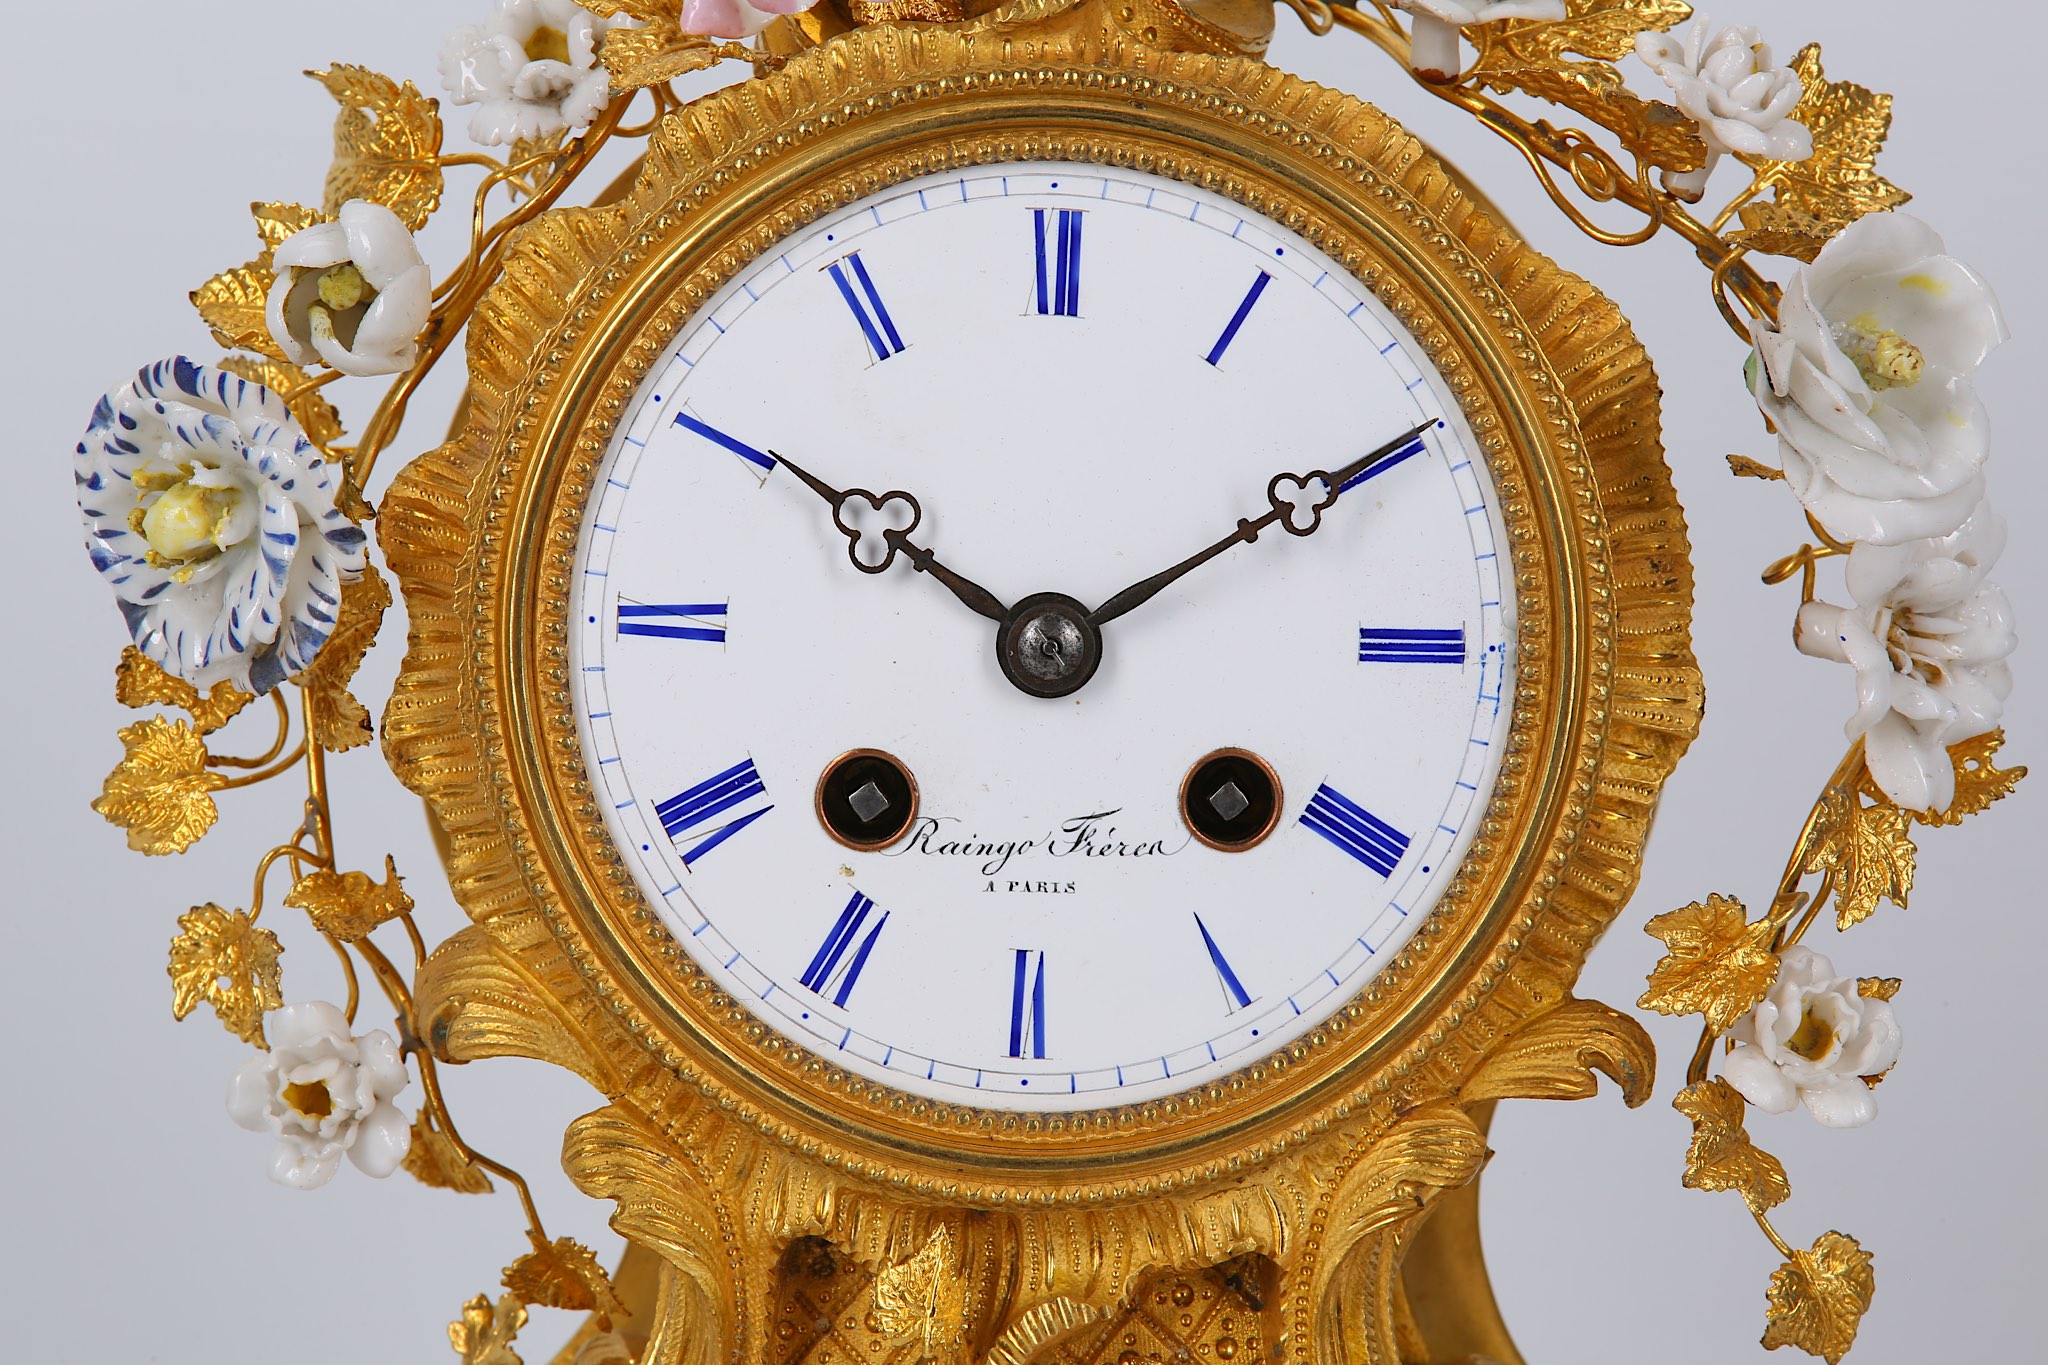 A MID 19TH CENTURY FRENCH GILT BRONZE AND PORCELAIN MOUNTED MANTEL CLOCK BY RAINGO FRERES, PARIS the - Image 2 of 9